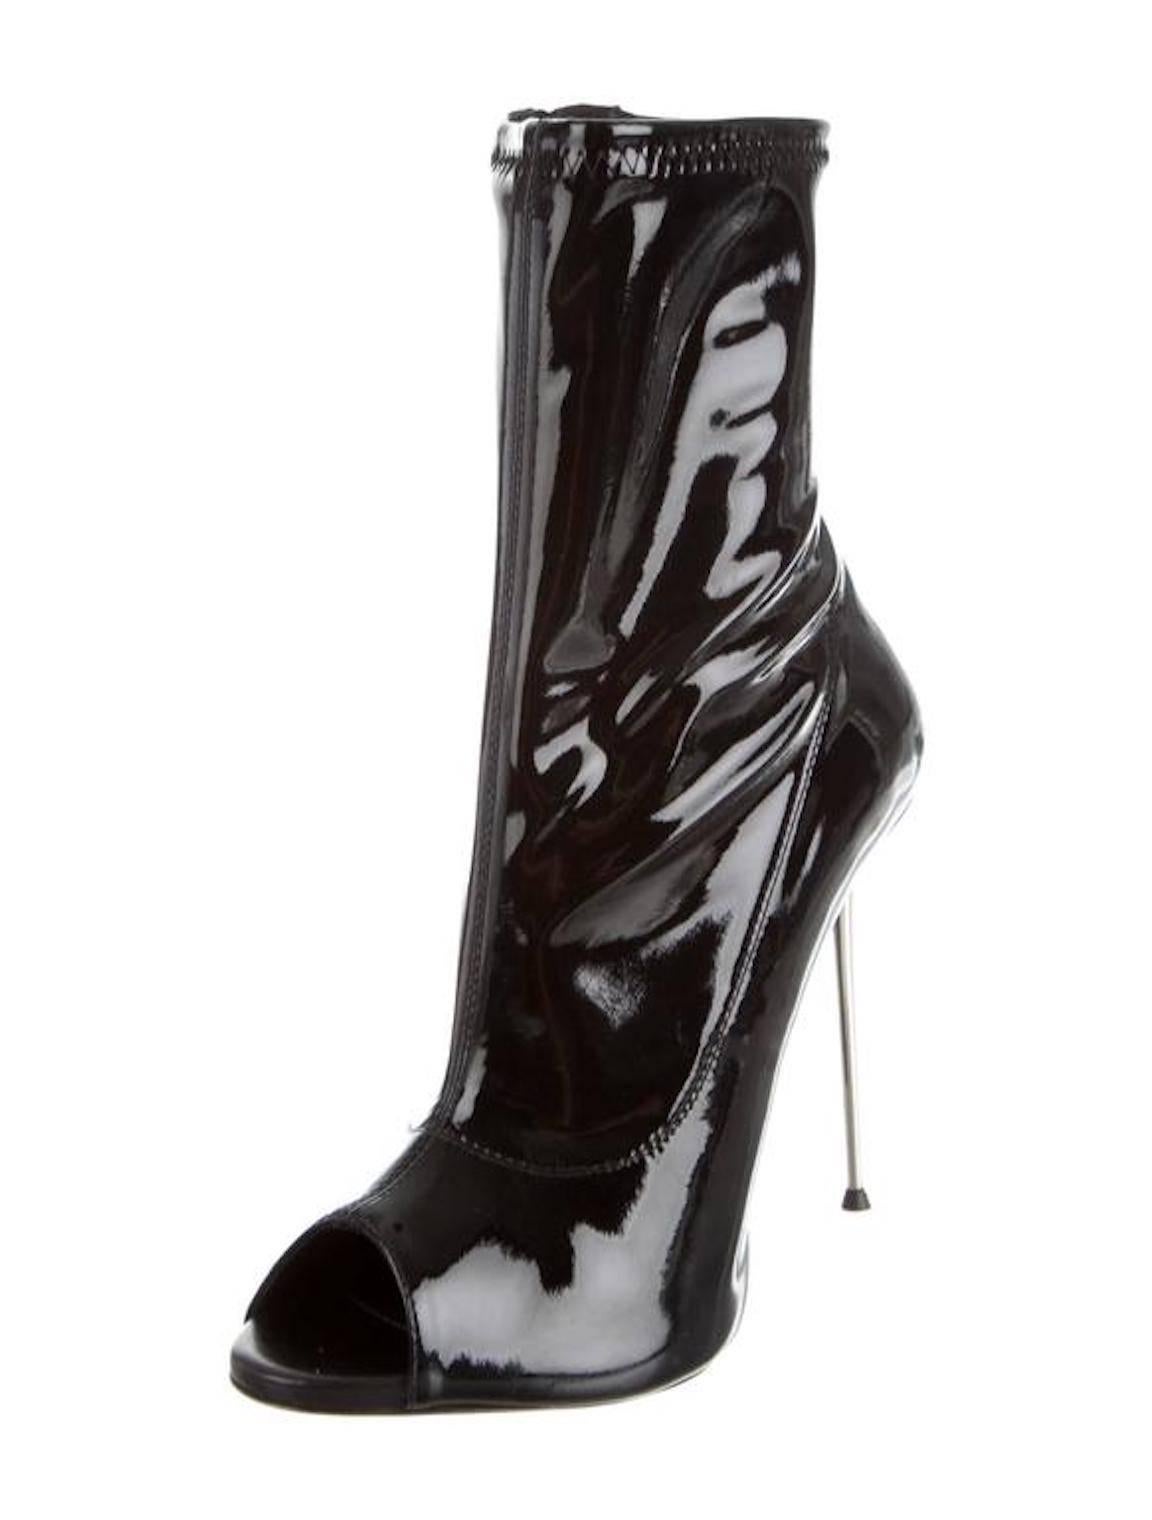 NEW! Giuseppe Zanotti Black Patent Leather Metal Heels Ankle Sock Boots Booties  For Sale 1